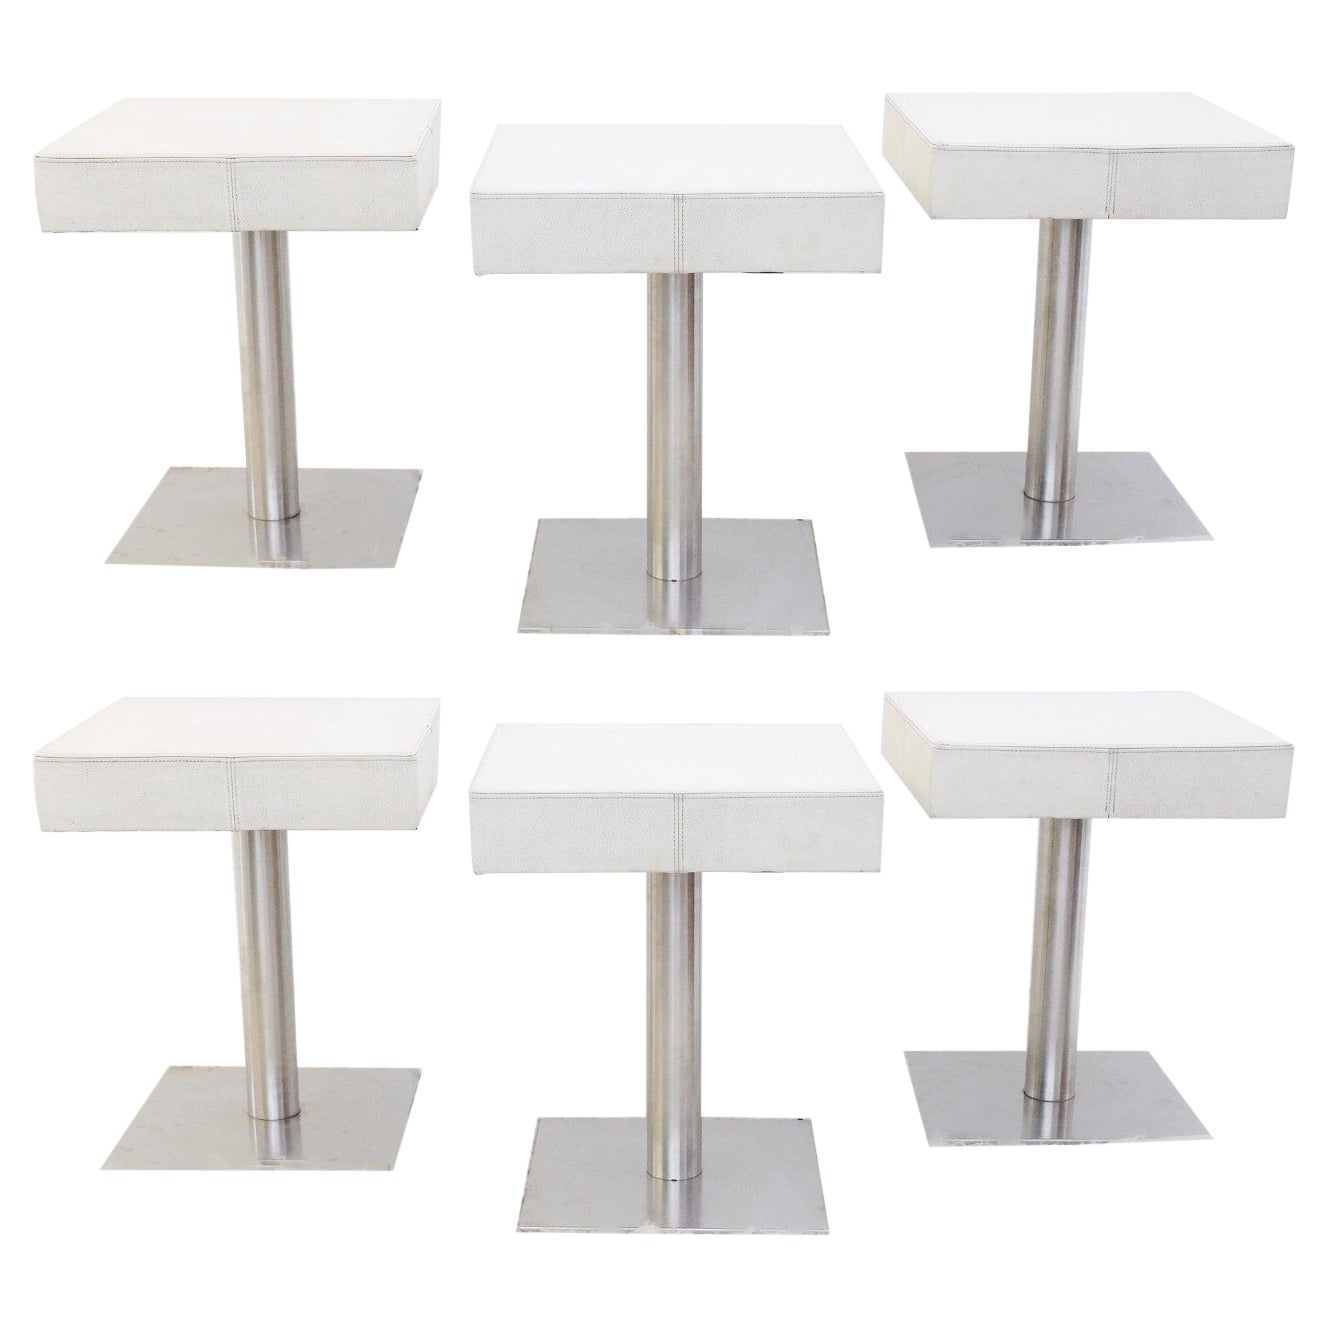 Set of 6 Chrome and White Leather Stools 